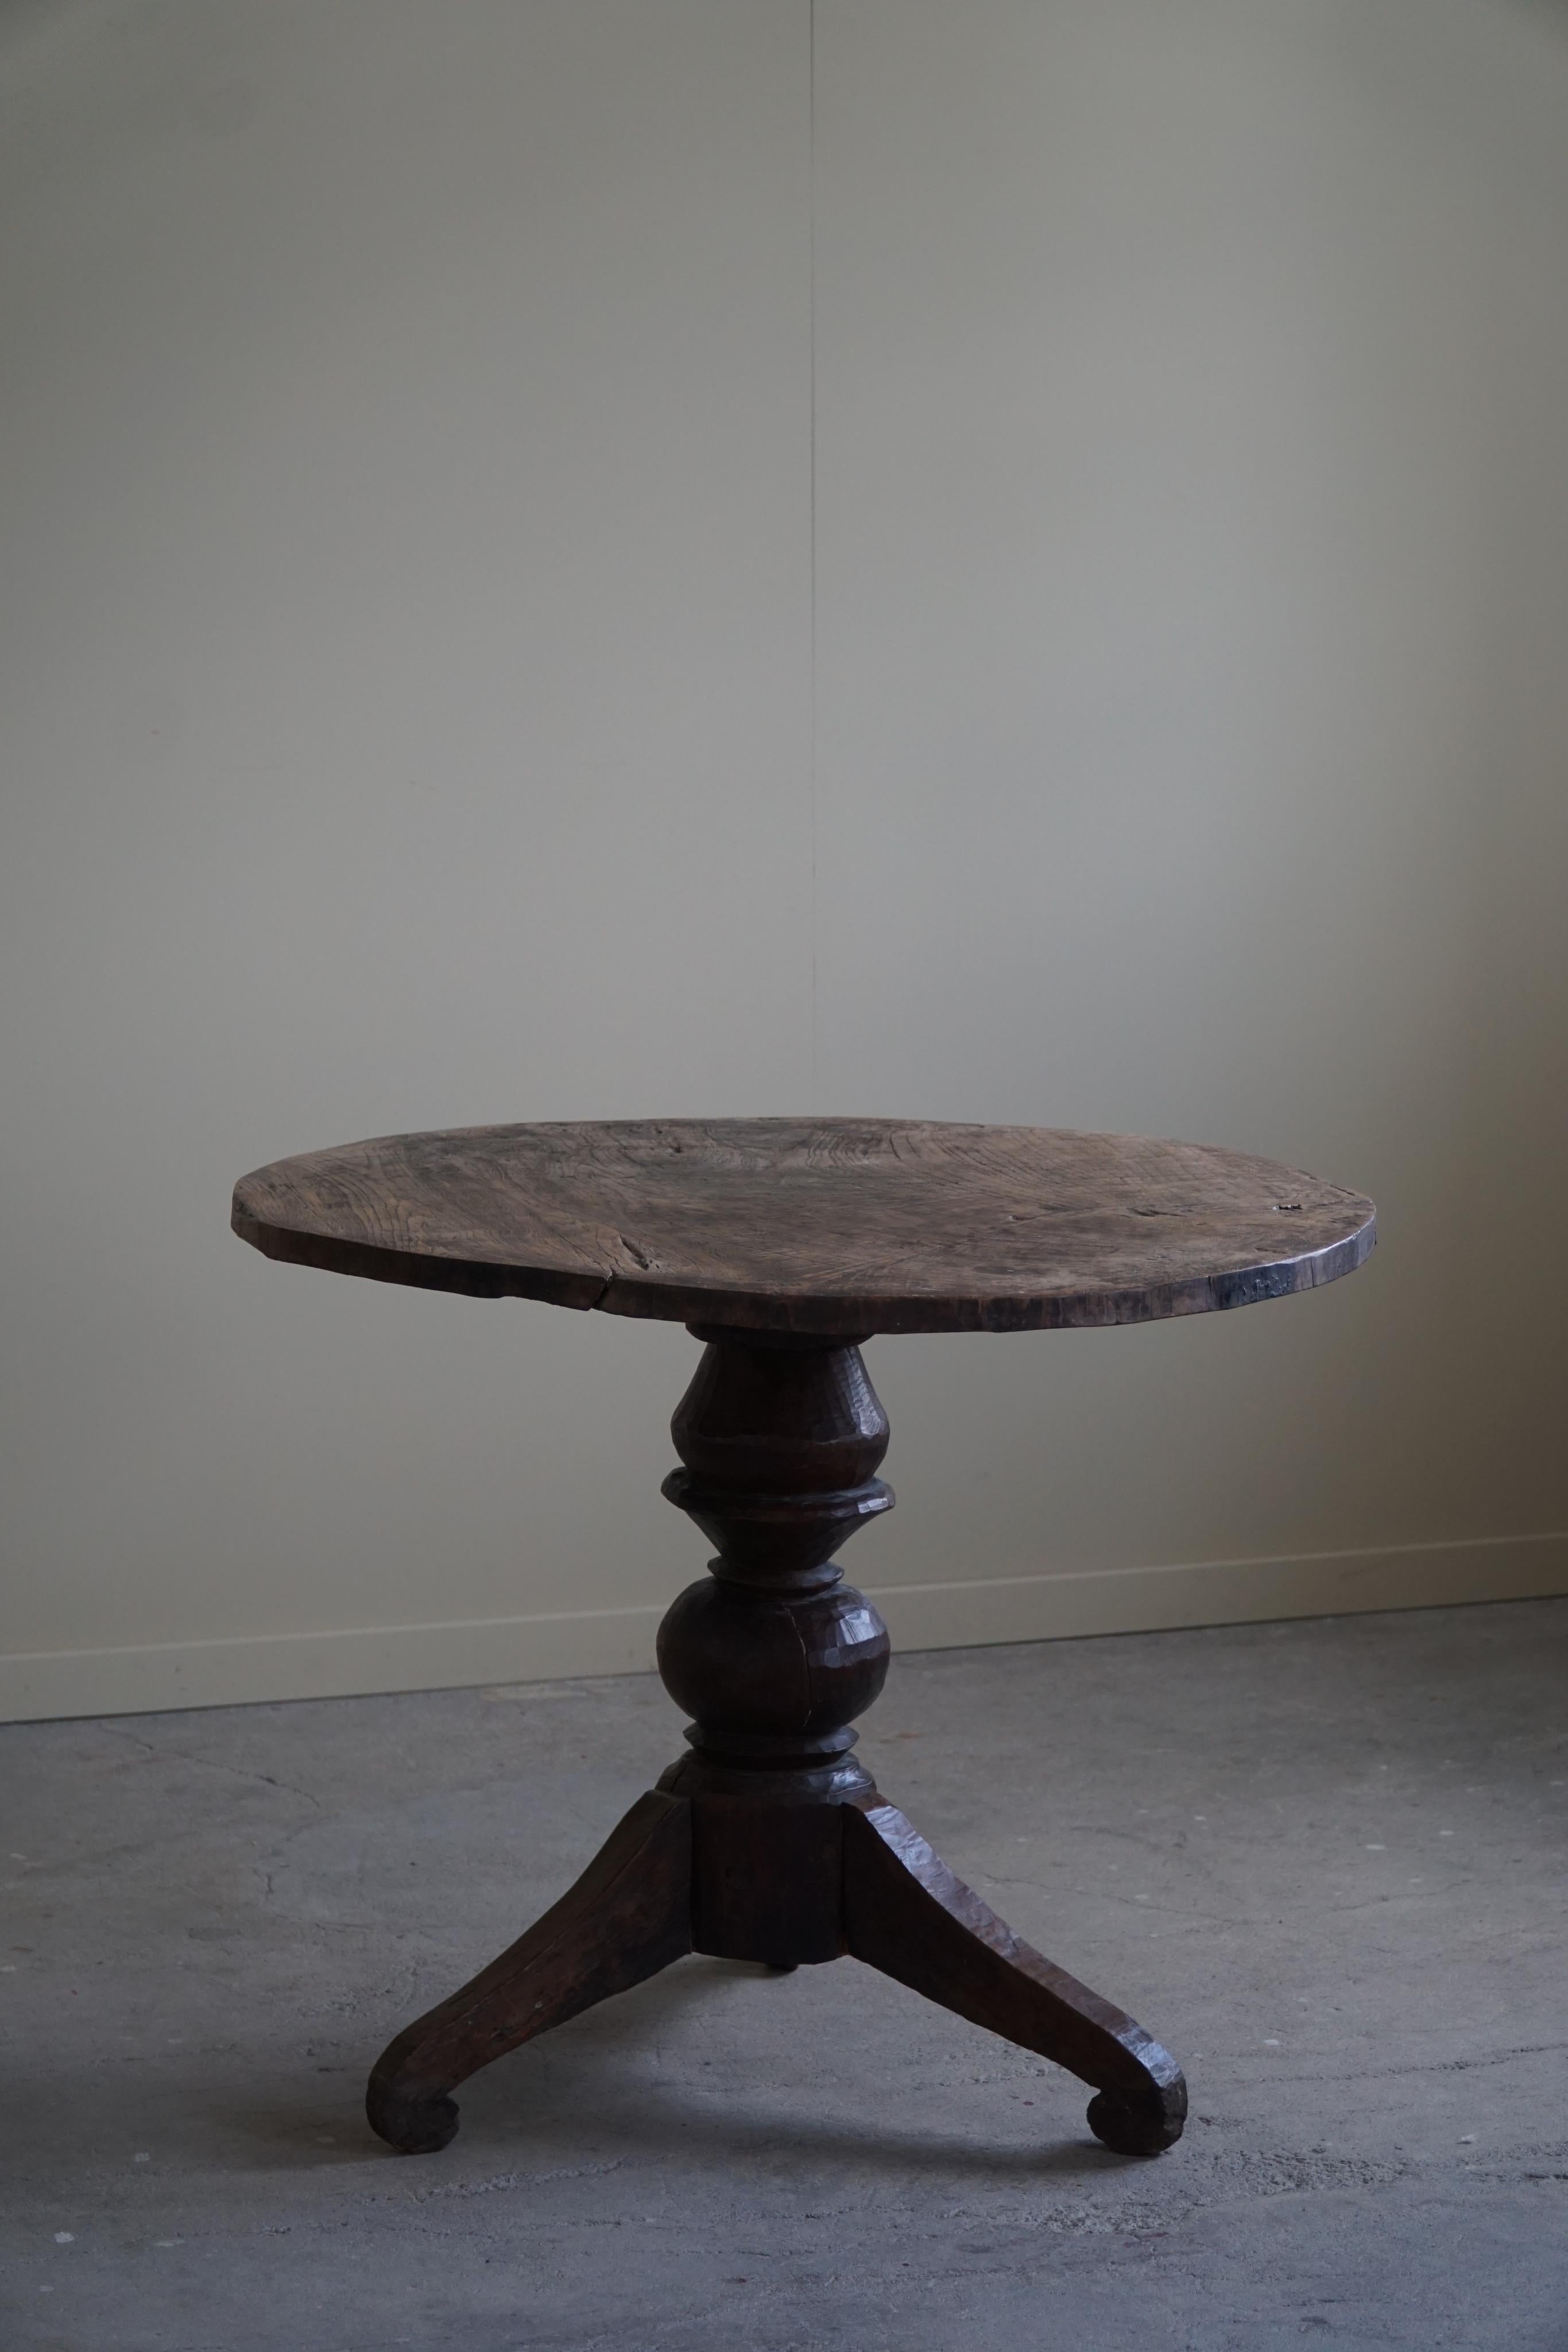 Antique Oak Dining Table / Side Table with Tripod Legs, Wabi Sabi, Late 18th C 11